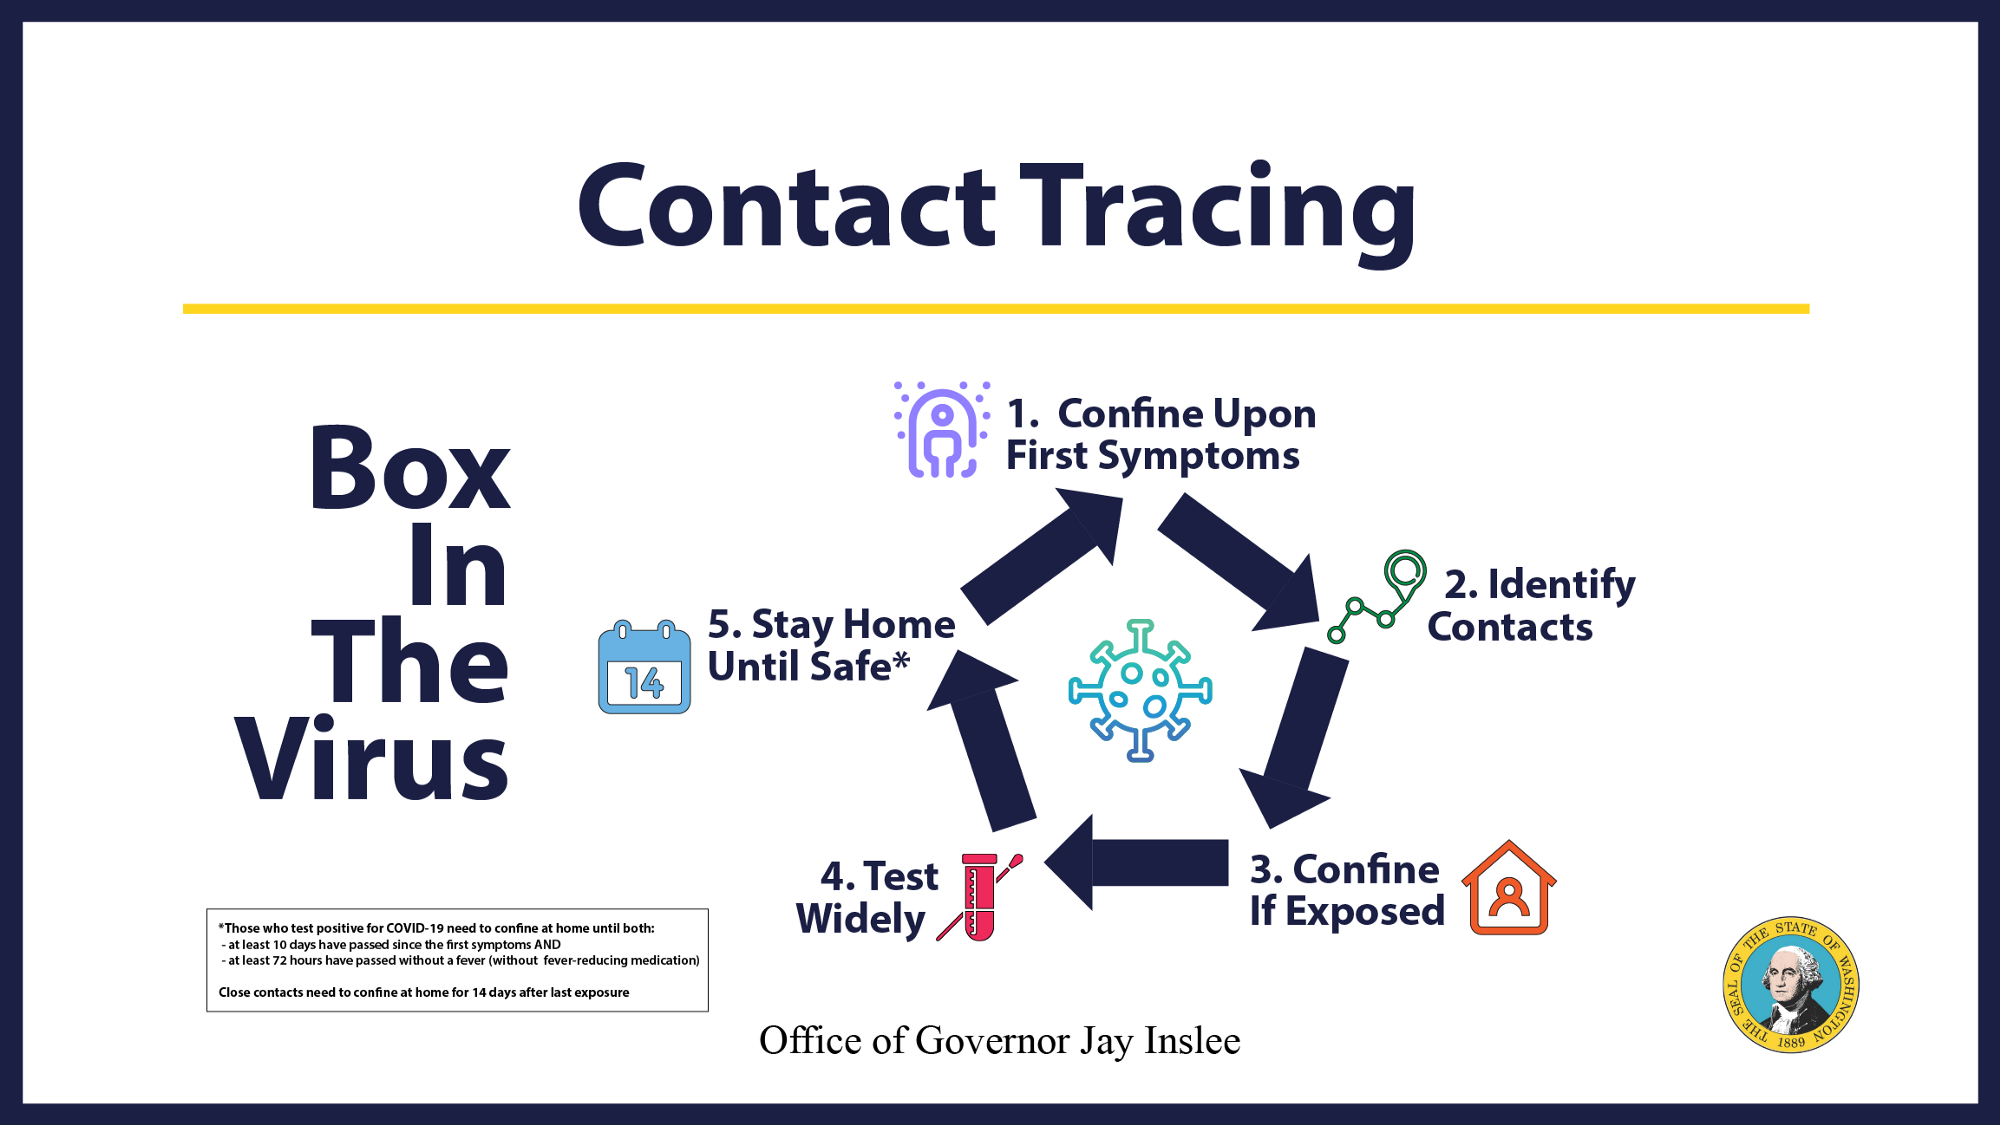 Governor Inslee Announces Contact Tracing Initiative